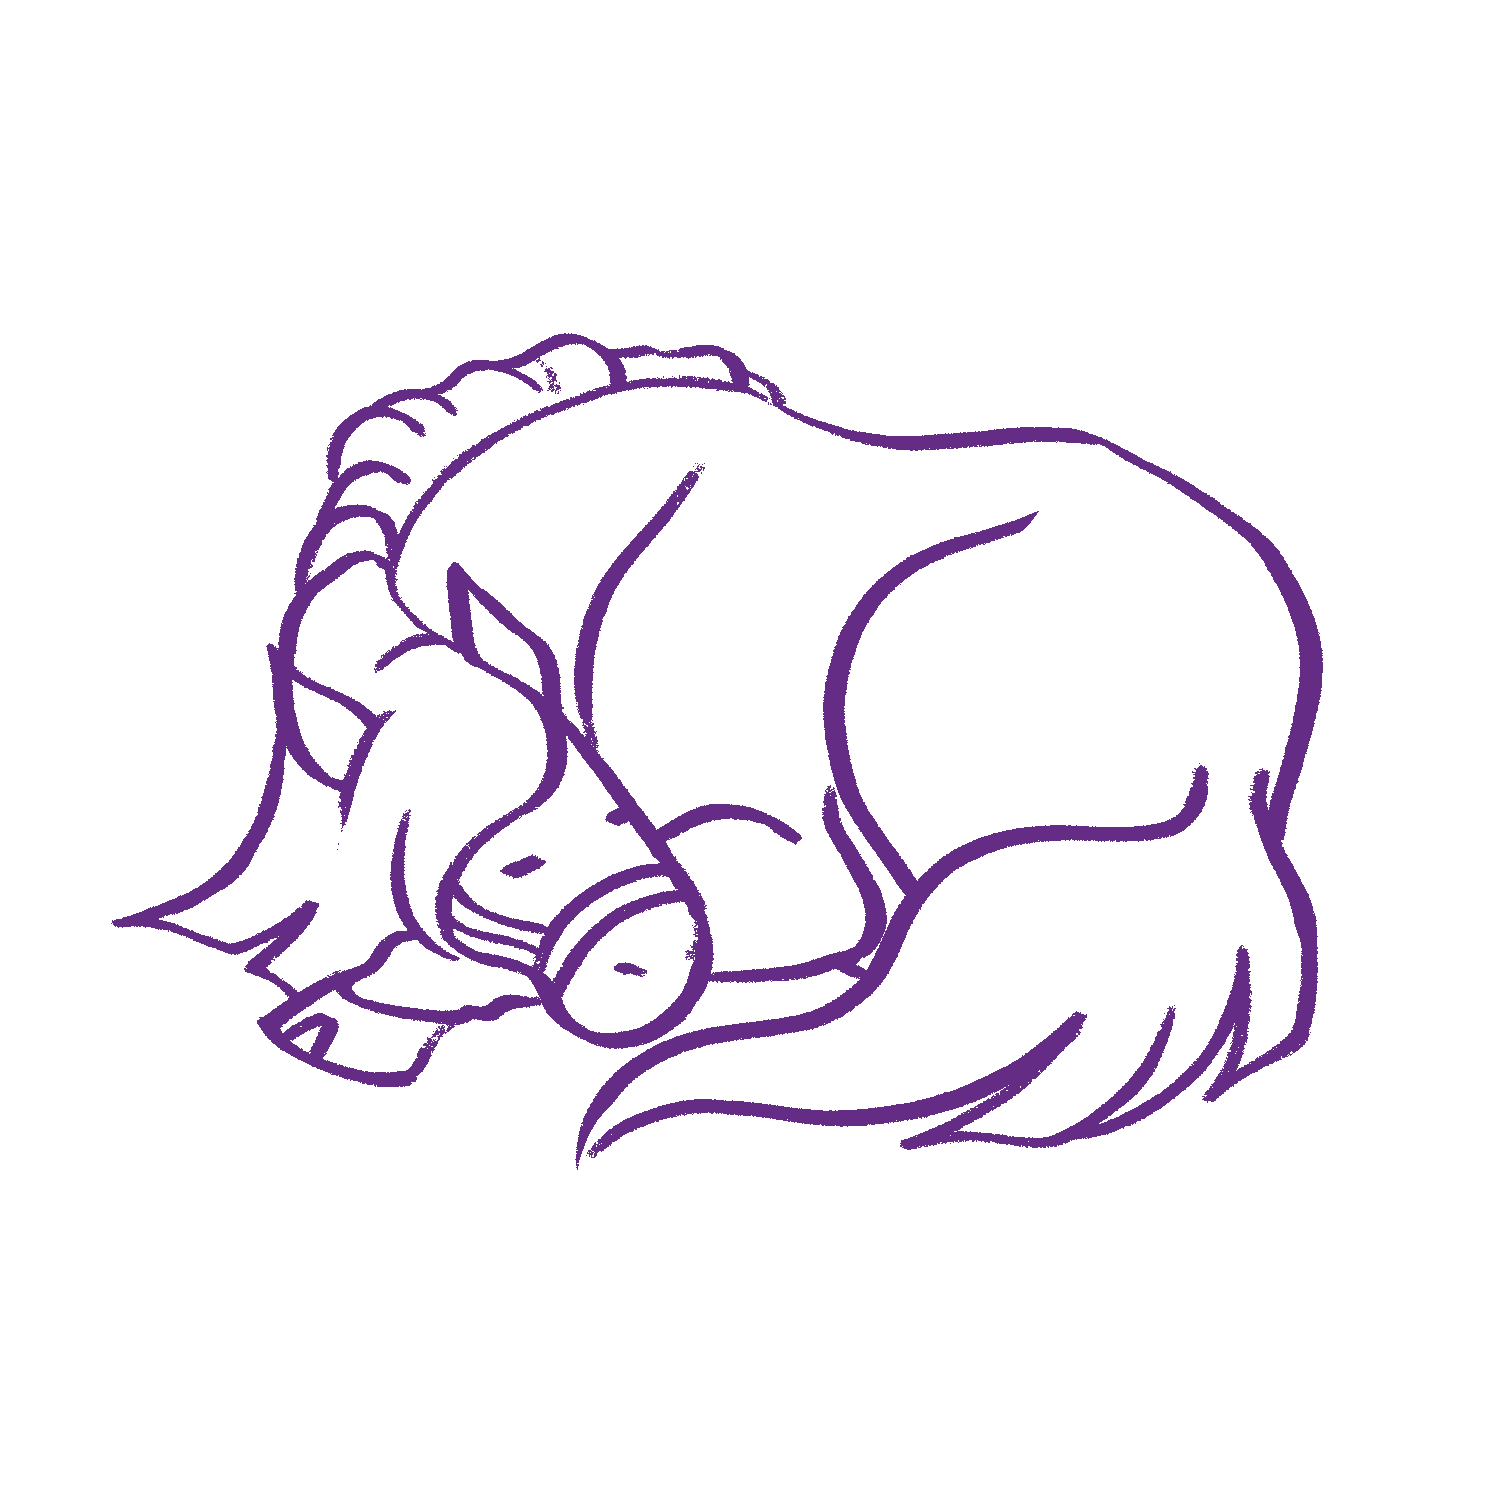 An illustration of the Noble Steed Games brand mascot, Horsey, resting and cosily curled up.